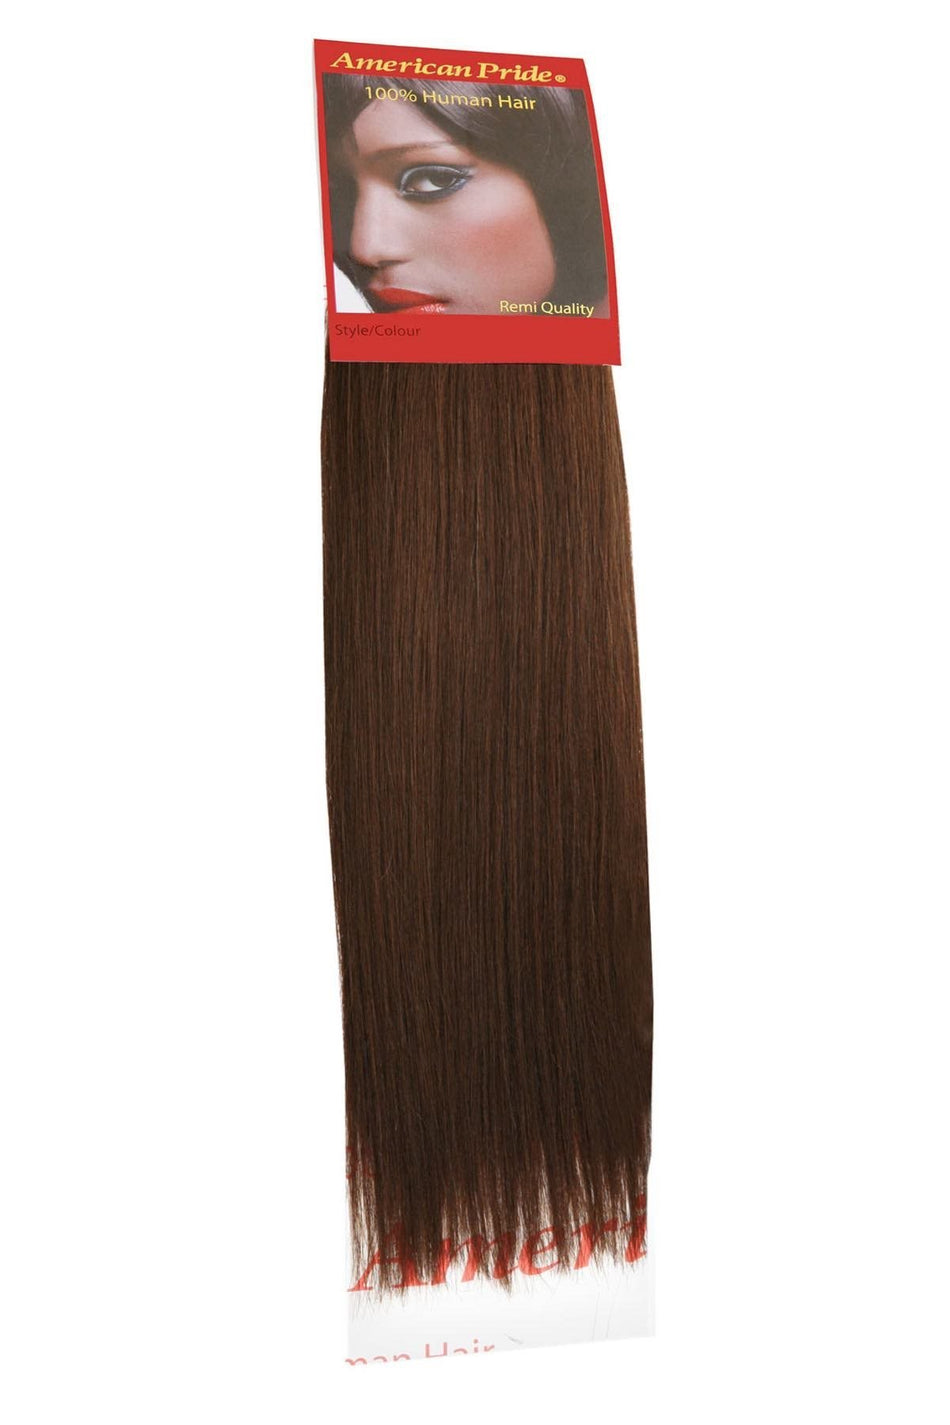 Yaki Weave | Human Hair Extensions | 12 Inch | Dark Brown (3) - Beauty Hair Products LtdHair Extensions